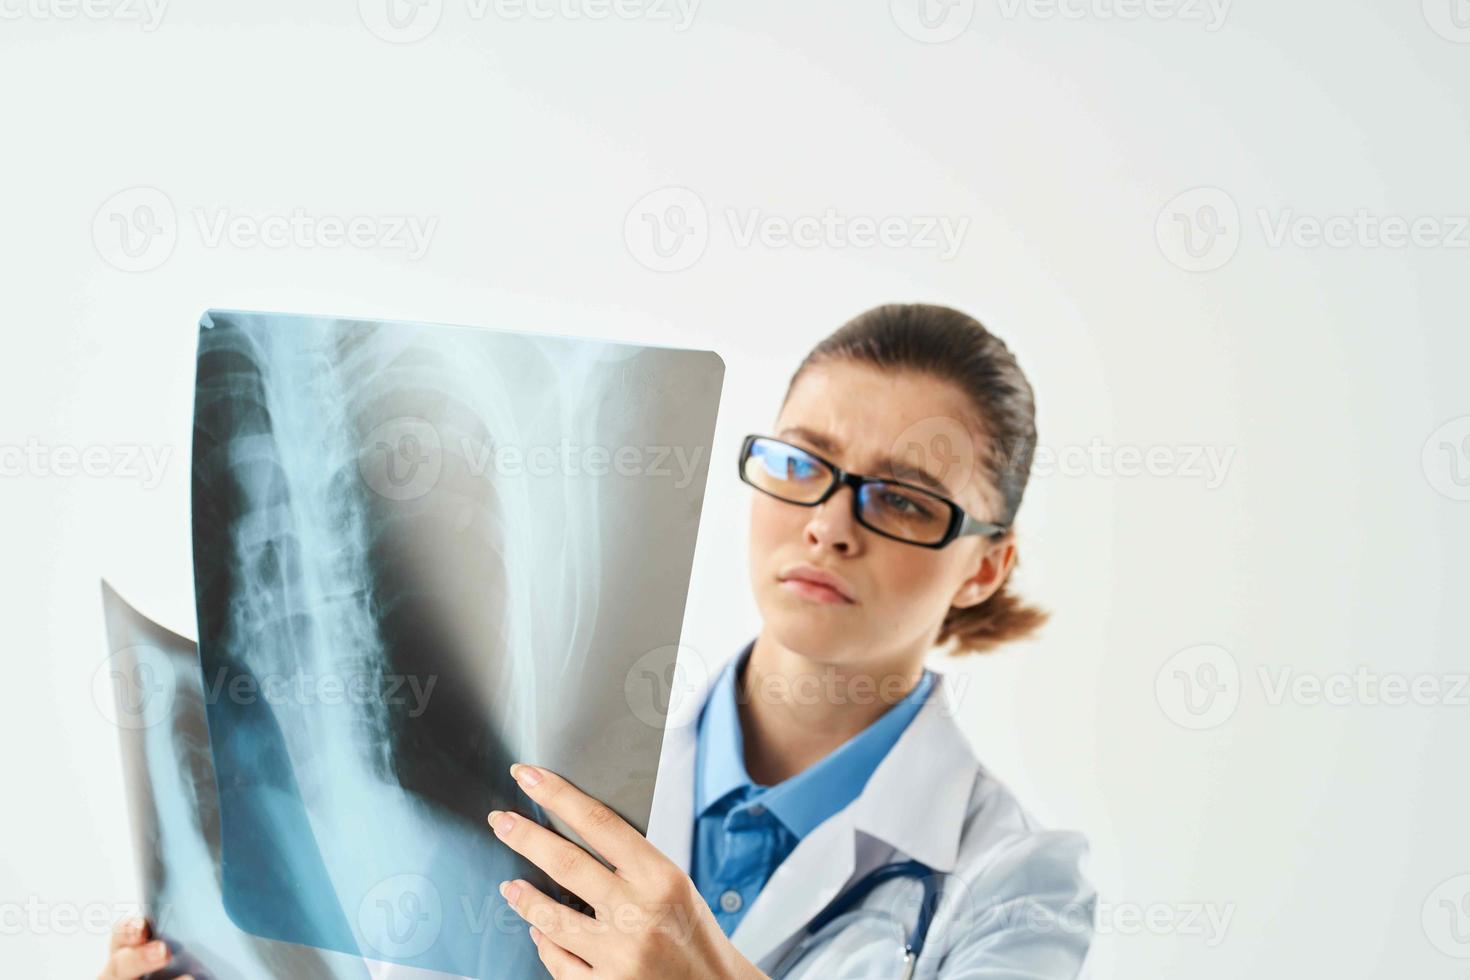 the radiologist looks at the x-ray diagnosis to a professional the results photo